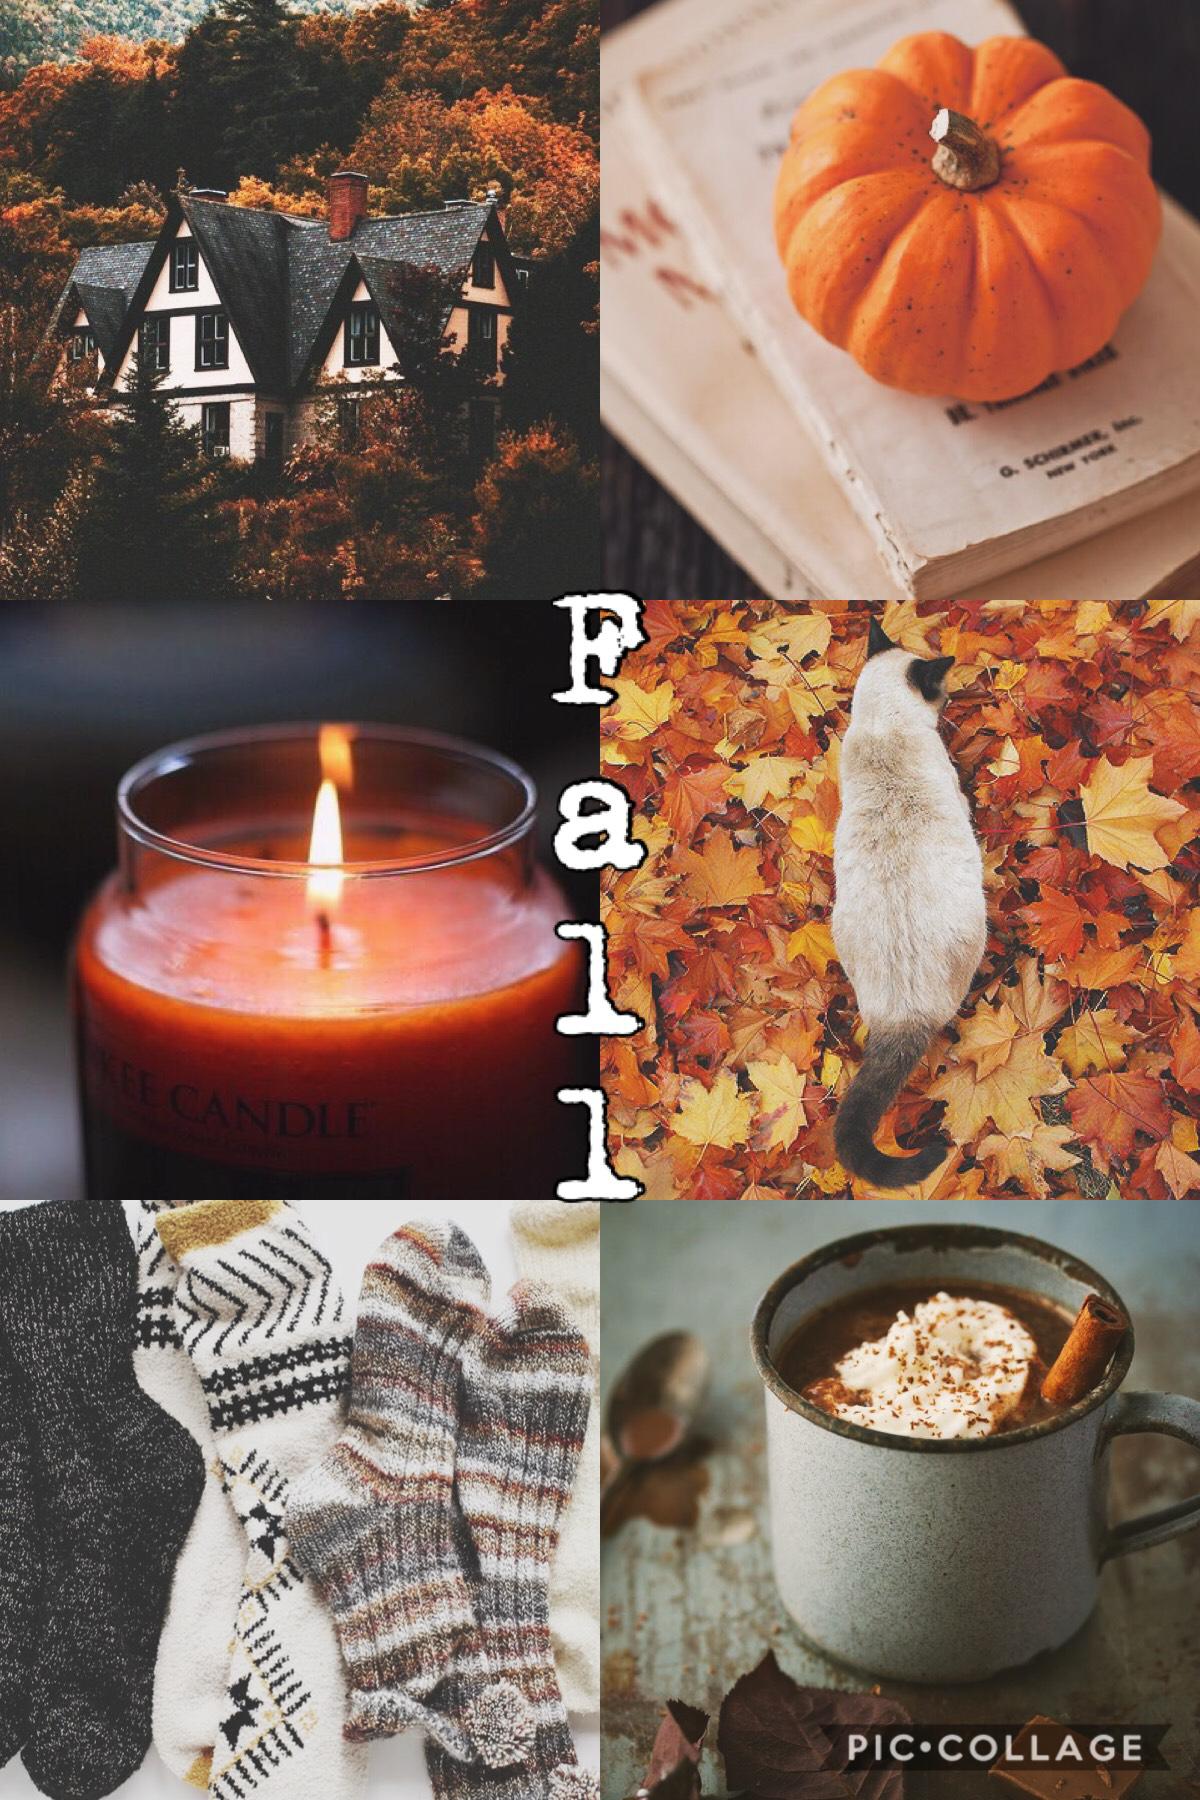 Not totally satisfied with this. 🤷🏻‍♀️ 🍁 ☕️ 🧦 🏡 🐈 🕯 🎃 Even tho it’s still fall for another month, I really need to finish posting things for it since I’ll be doing Christmas stuff soon. 😆 🗓 🎄 It’s National Play Monopoly Day! 🎲